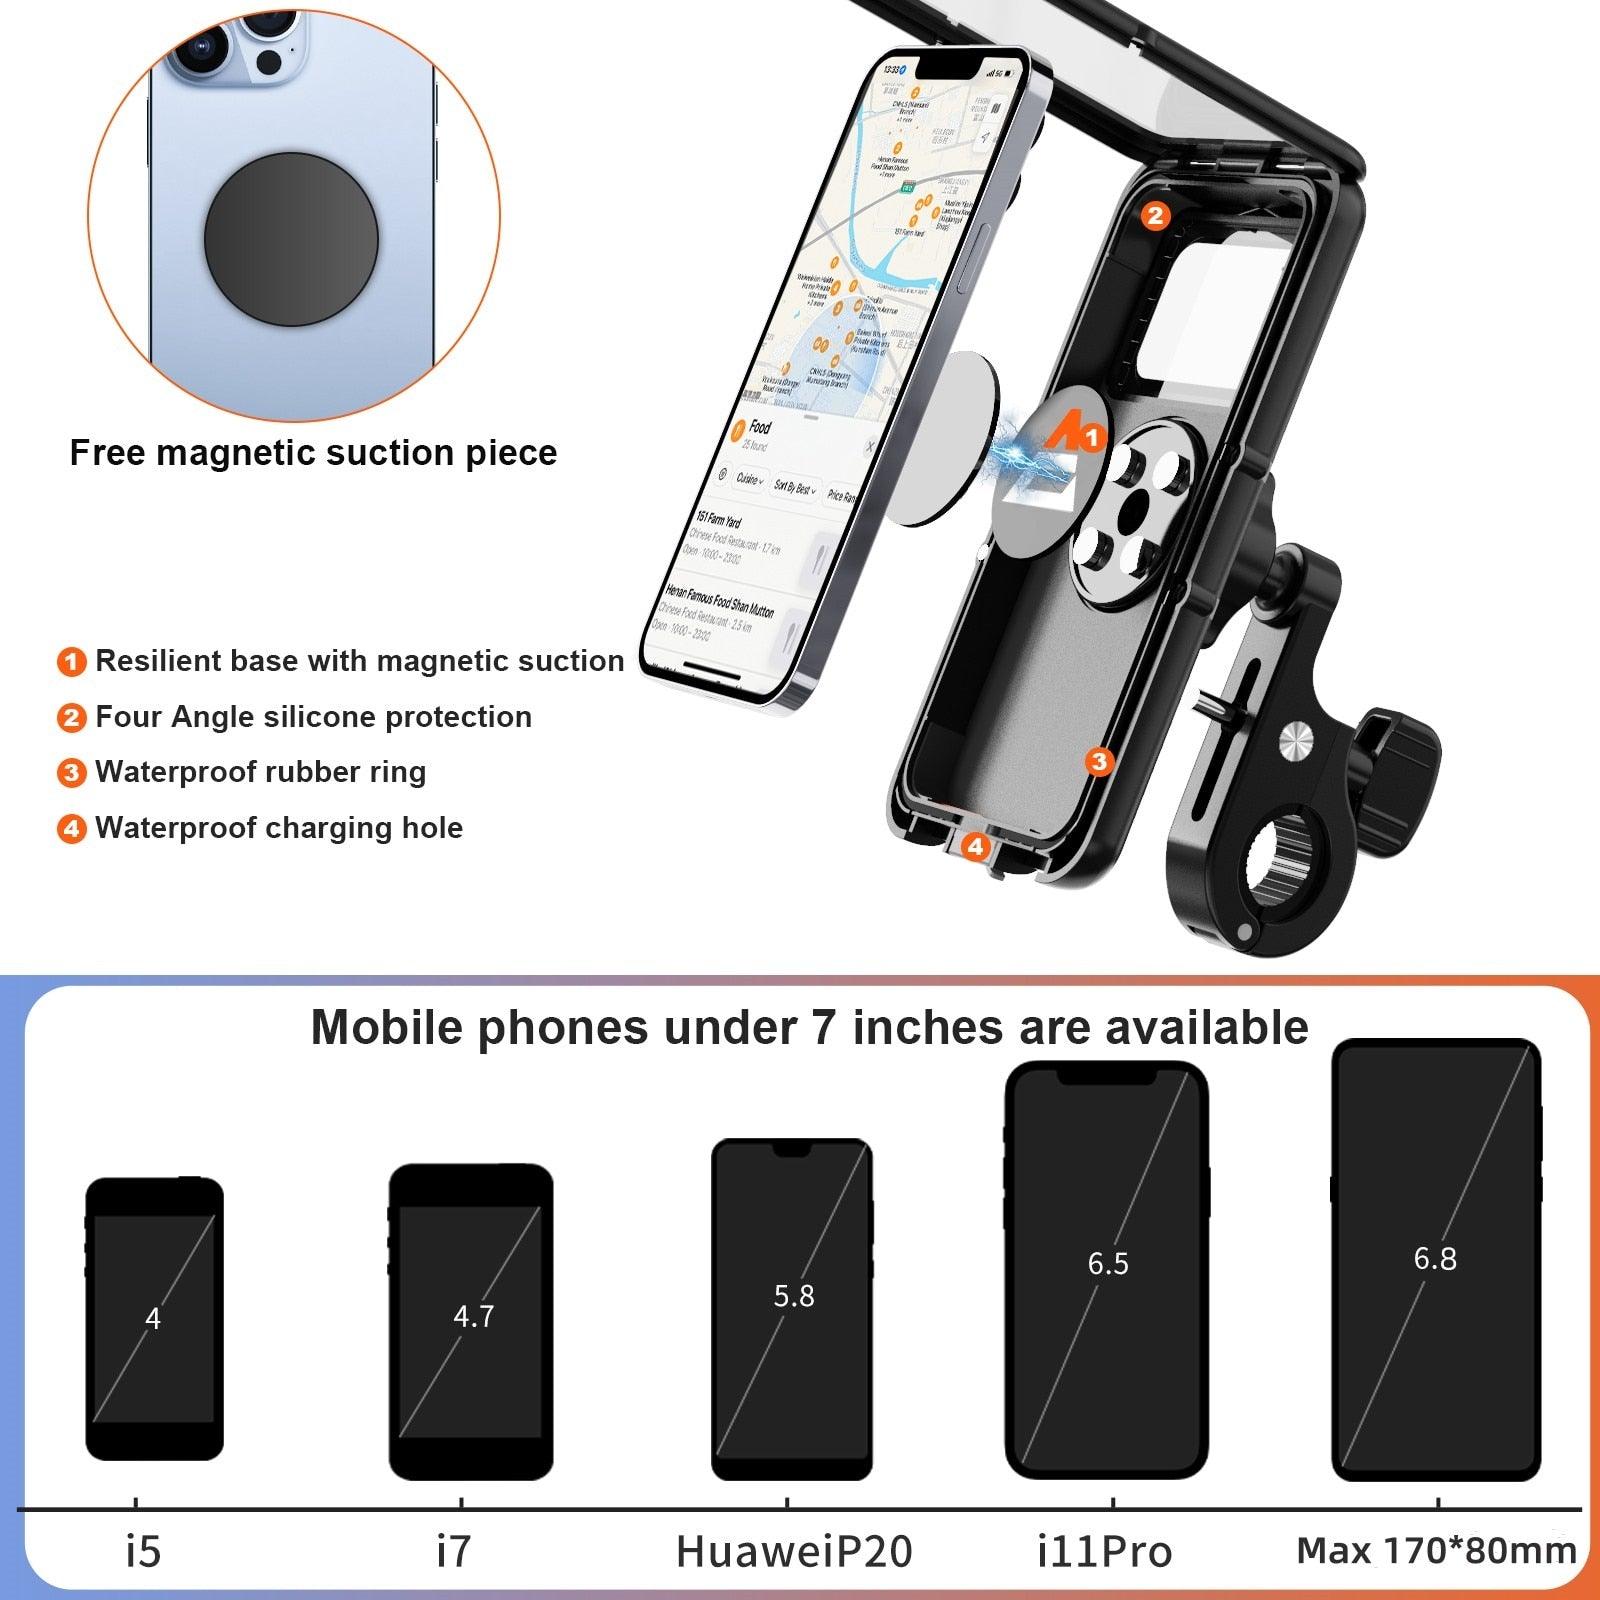 Acrunu Motorcycle Phone Holder MTB Waterproof Cell Phone Holder Bike Phone Holder 360° Rotation Electric Scooter Holder - Pogo Cycles